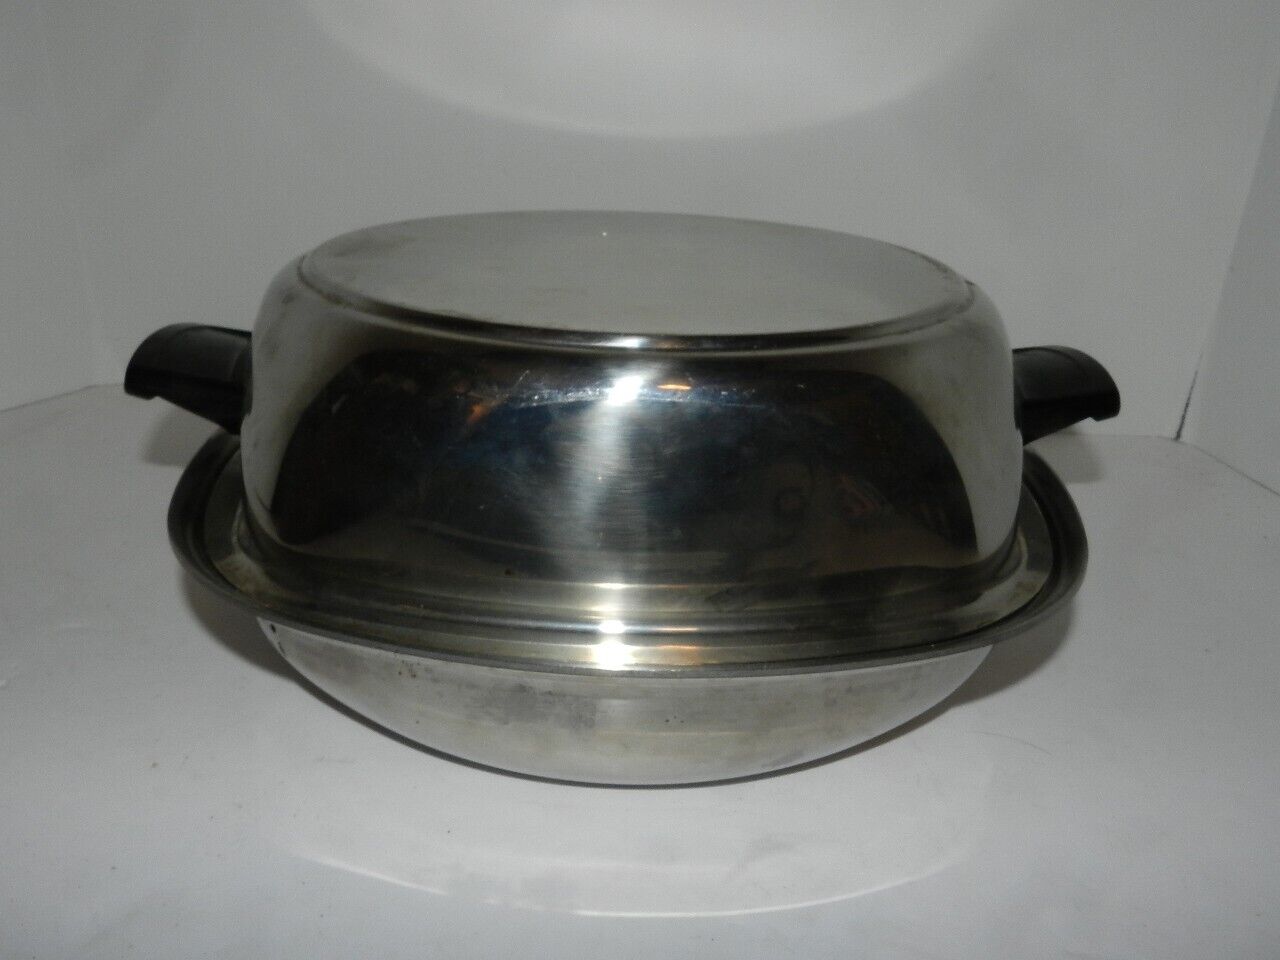 Vintage Aristo Craft Stainless Steel Stockpot Egg Poacher High Dome Lid